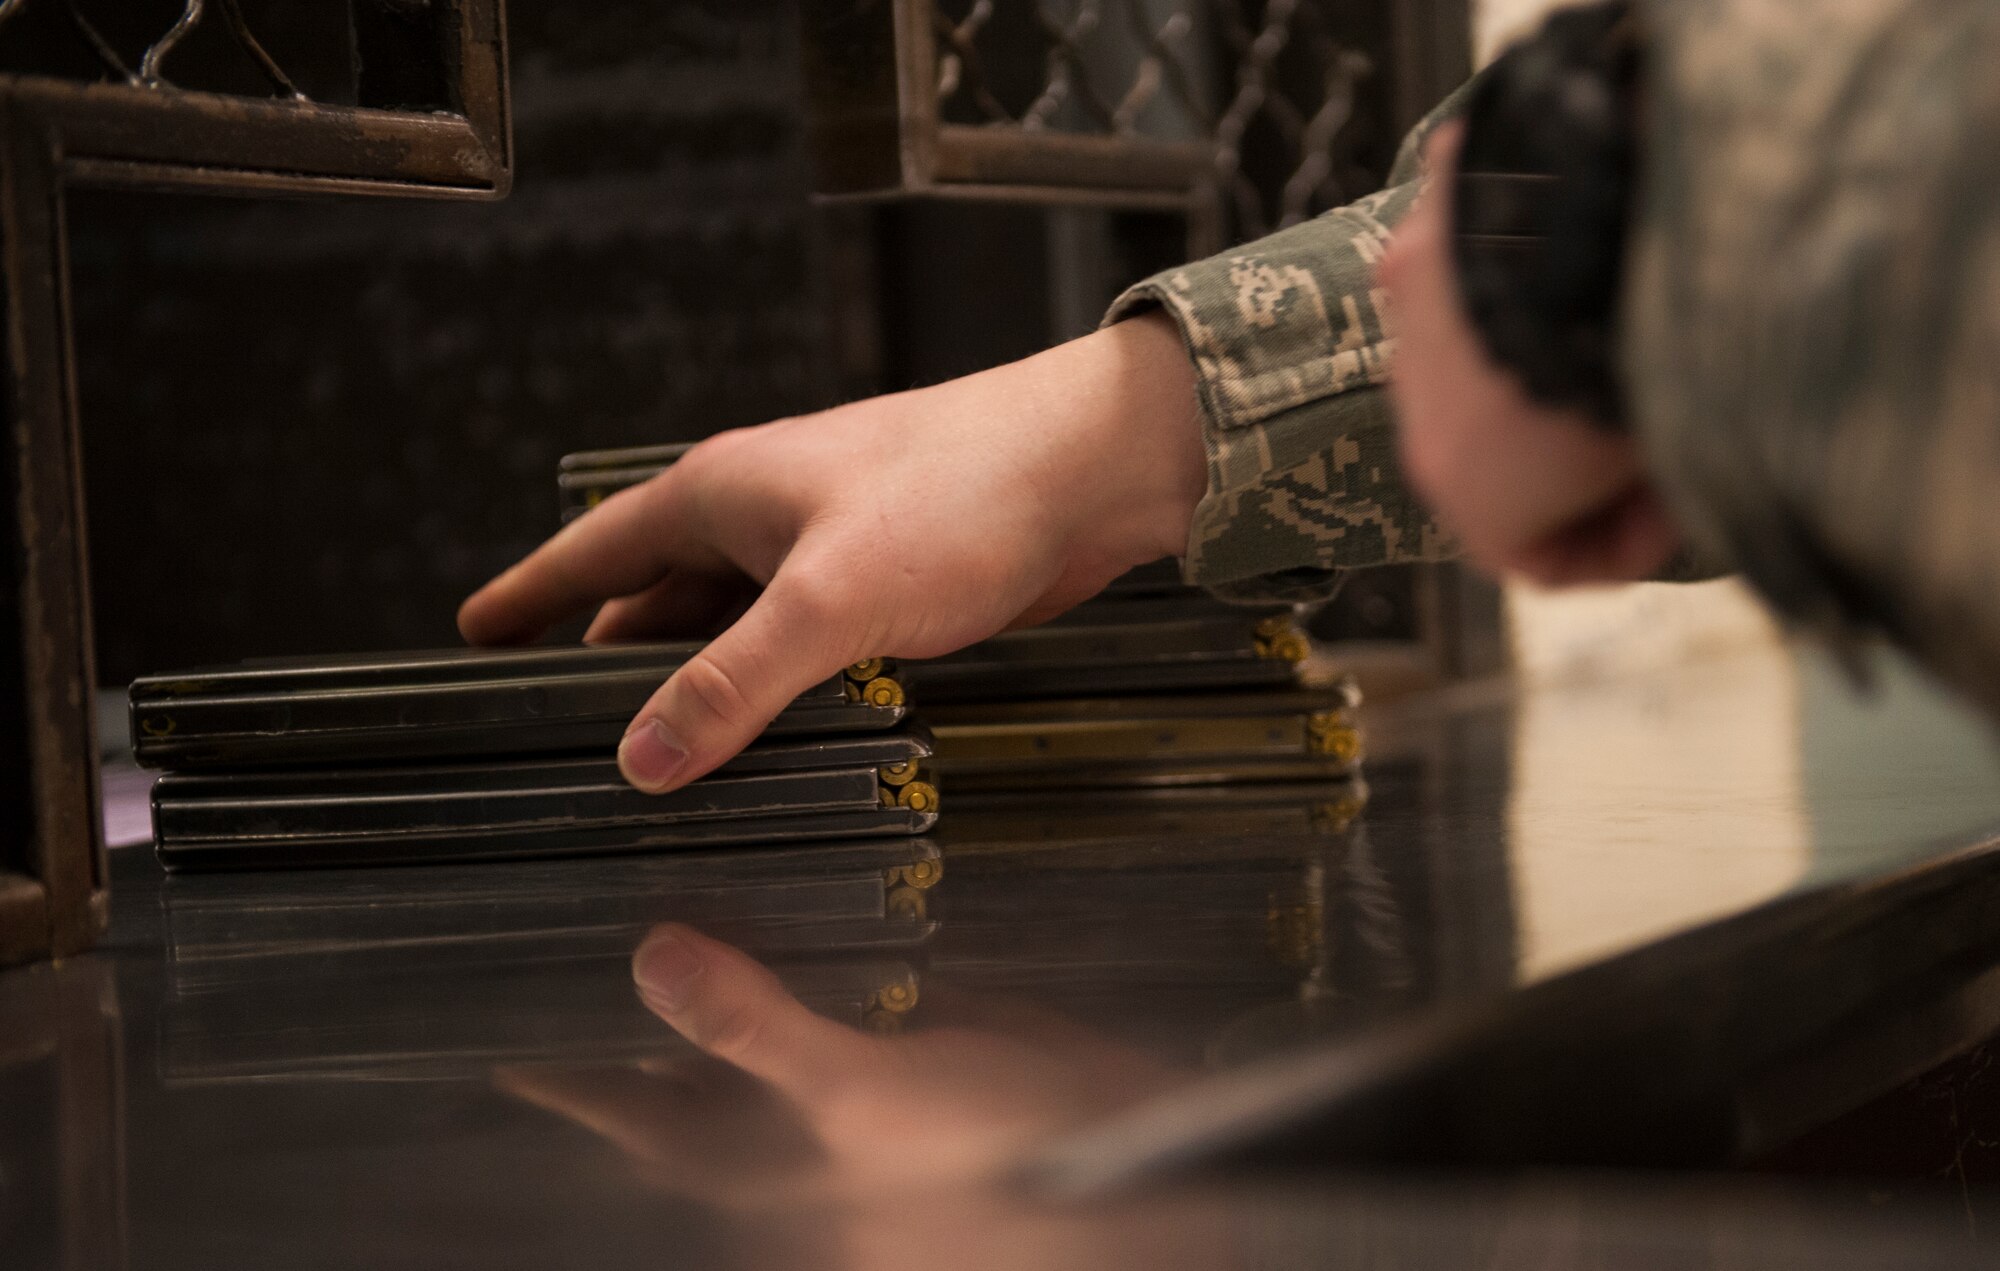 An Airman from the 5th Security Forces Squadron reaches for his ammo magazines at Minot Air Force Base’s armory window, Jan. 13, 2014. Security forces Airmen are issued the proper weapons for their shift at the armory. (U.S. Air Force photo/Airman 1st Class Apryl Hall)